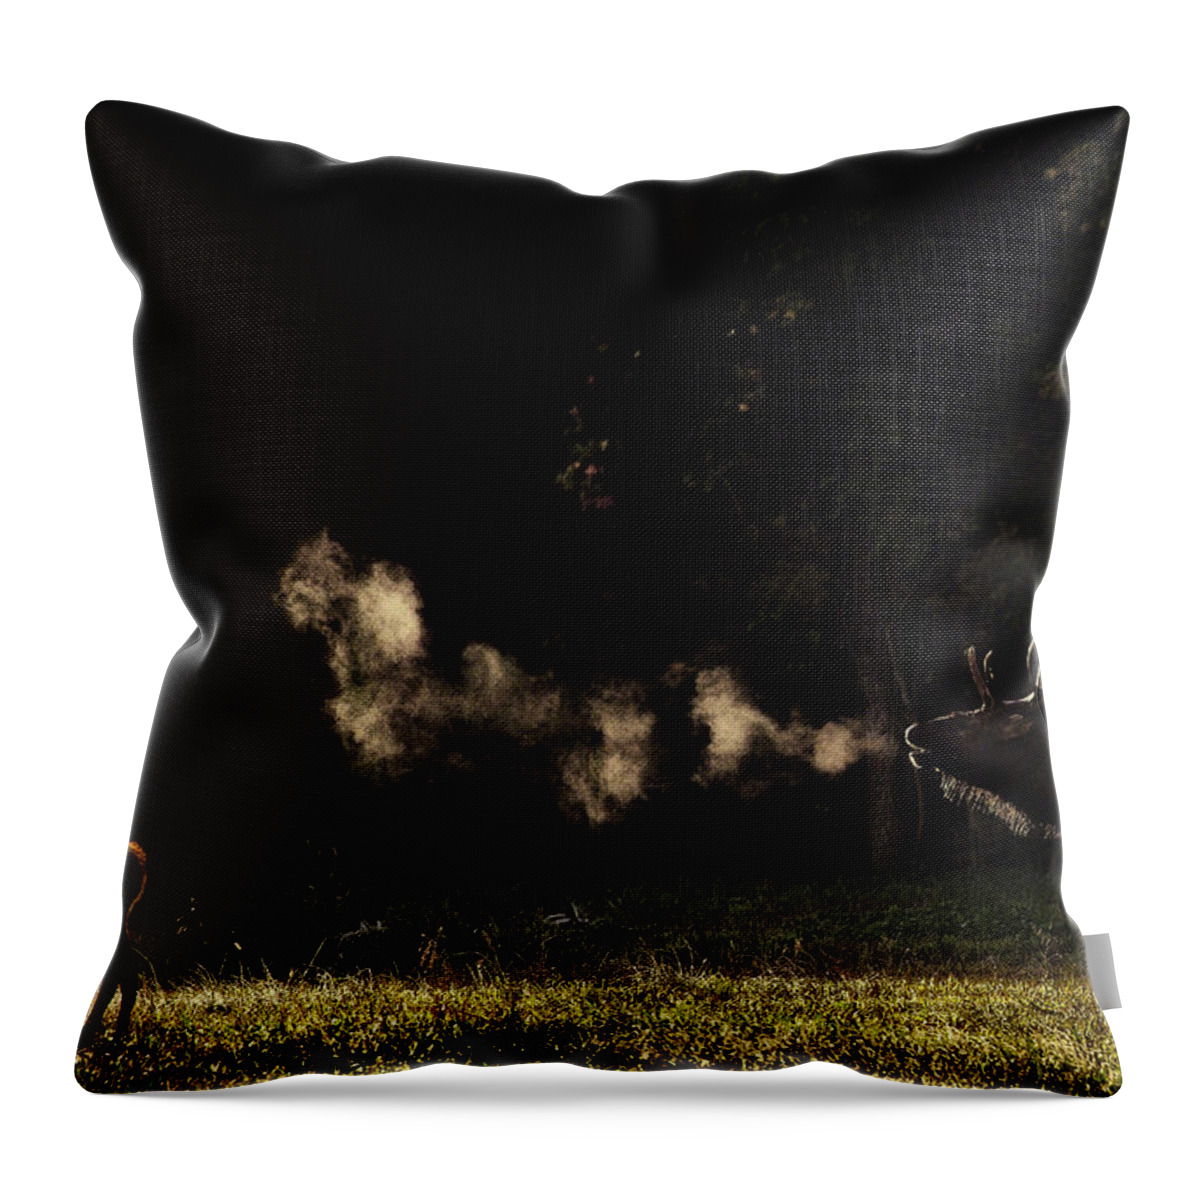 Elk Bugle Throw Pillow featuring the photograph Steamy Breath Elk Bugle by Michael Dougherty